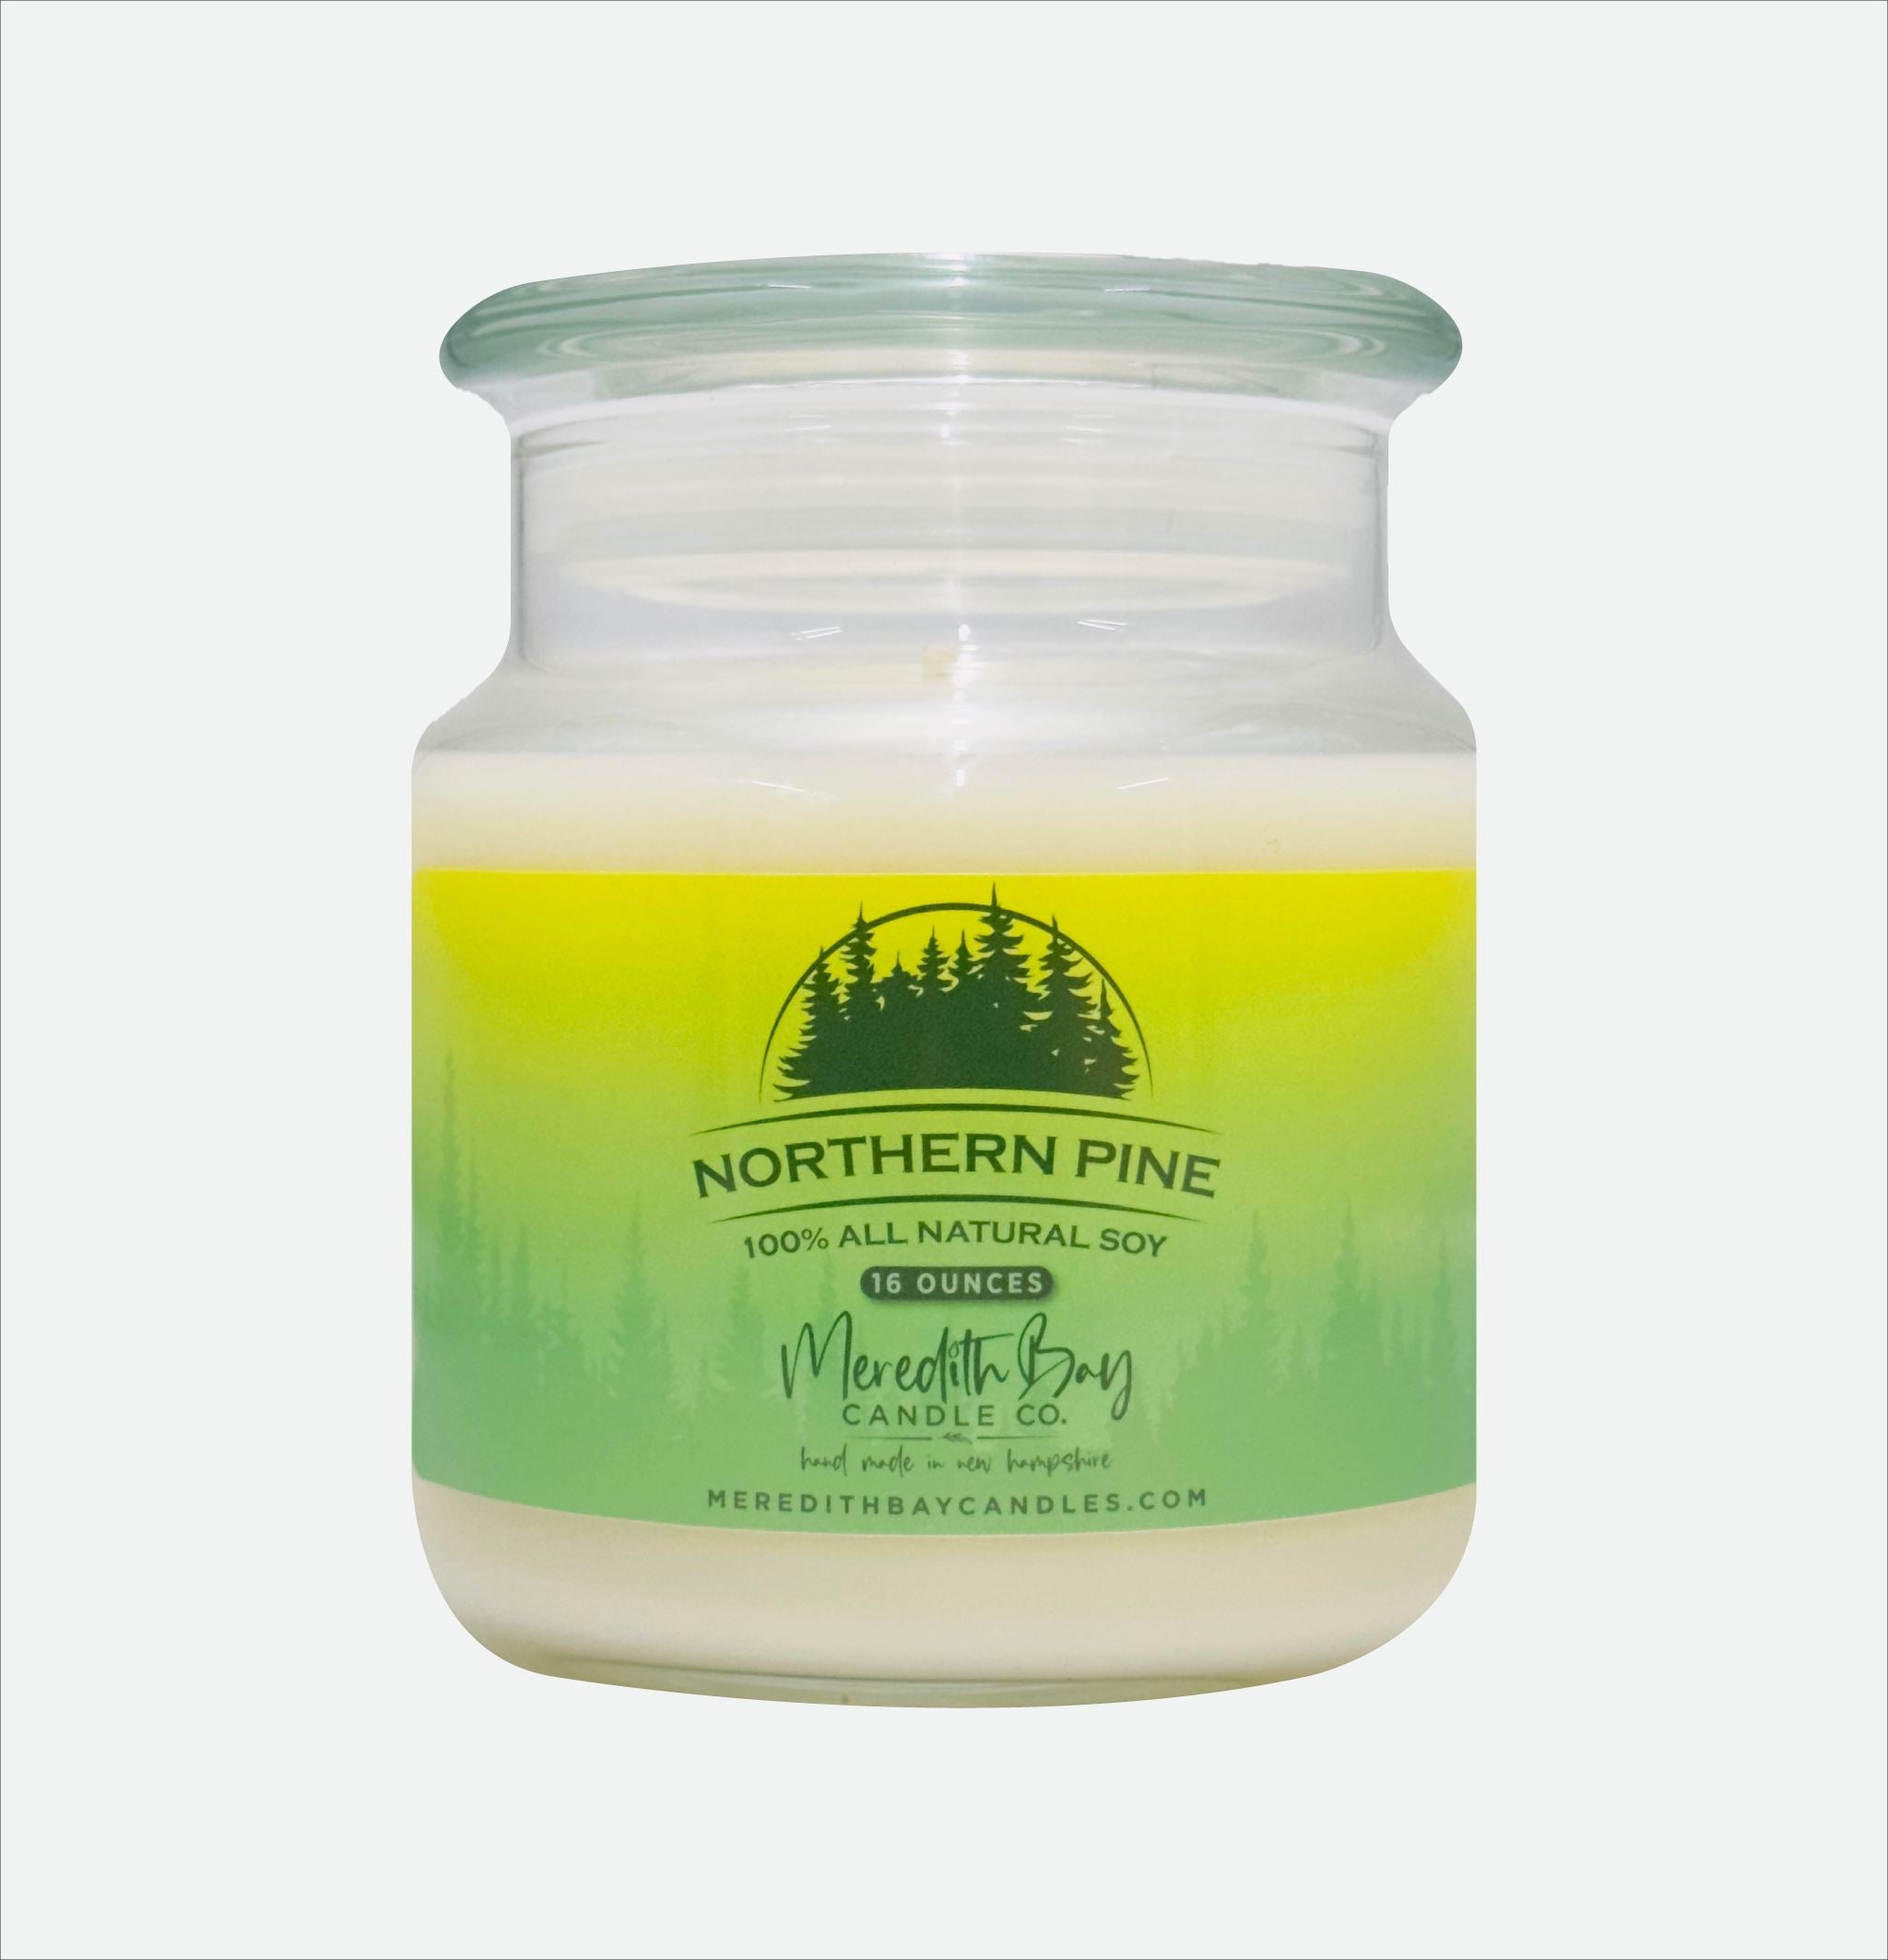 Northern Pine Soy Candle Meredith Bay Candle Co 16 Oz 